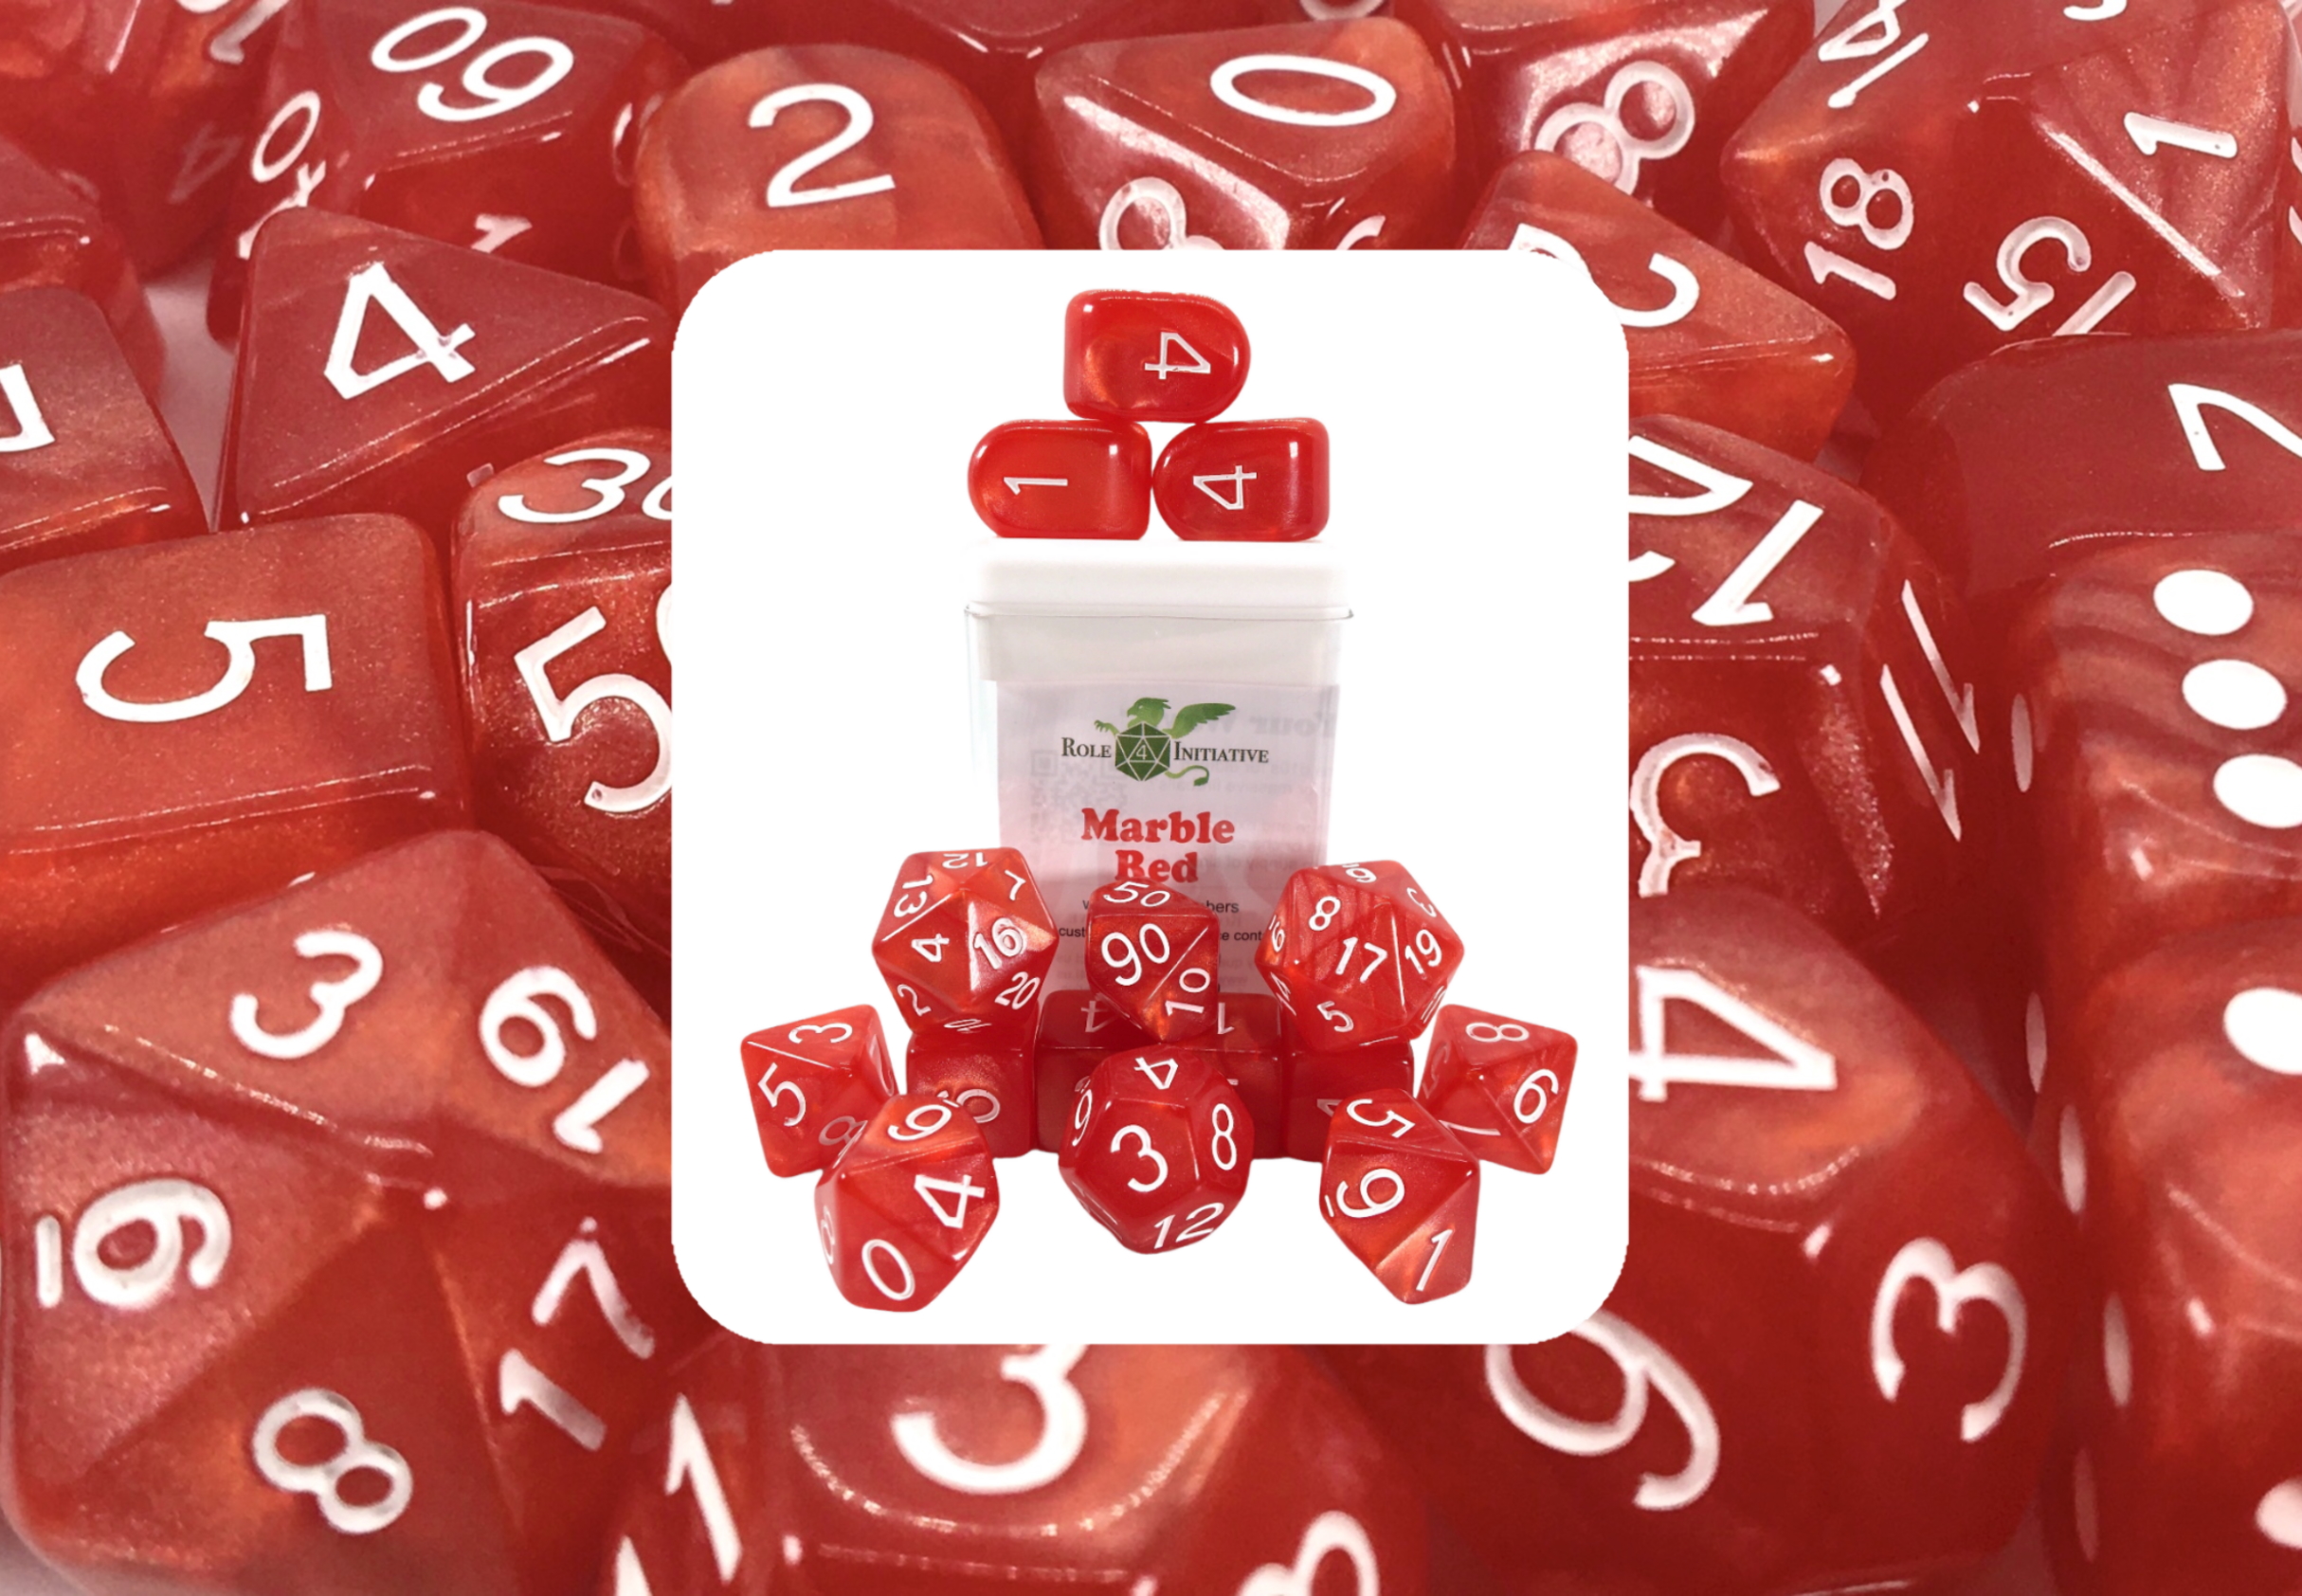 Role 4 Initiative: Polyhedral 15 Dice Set: Marble Red with White (Arch D4) 